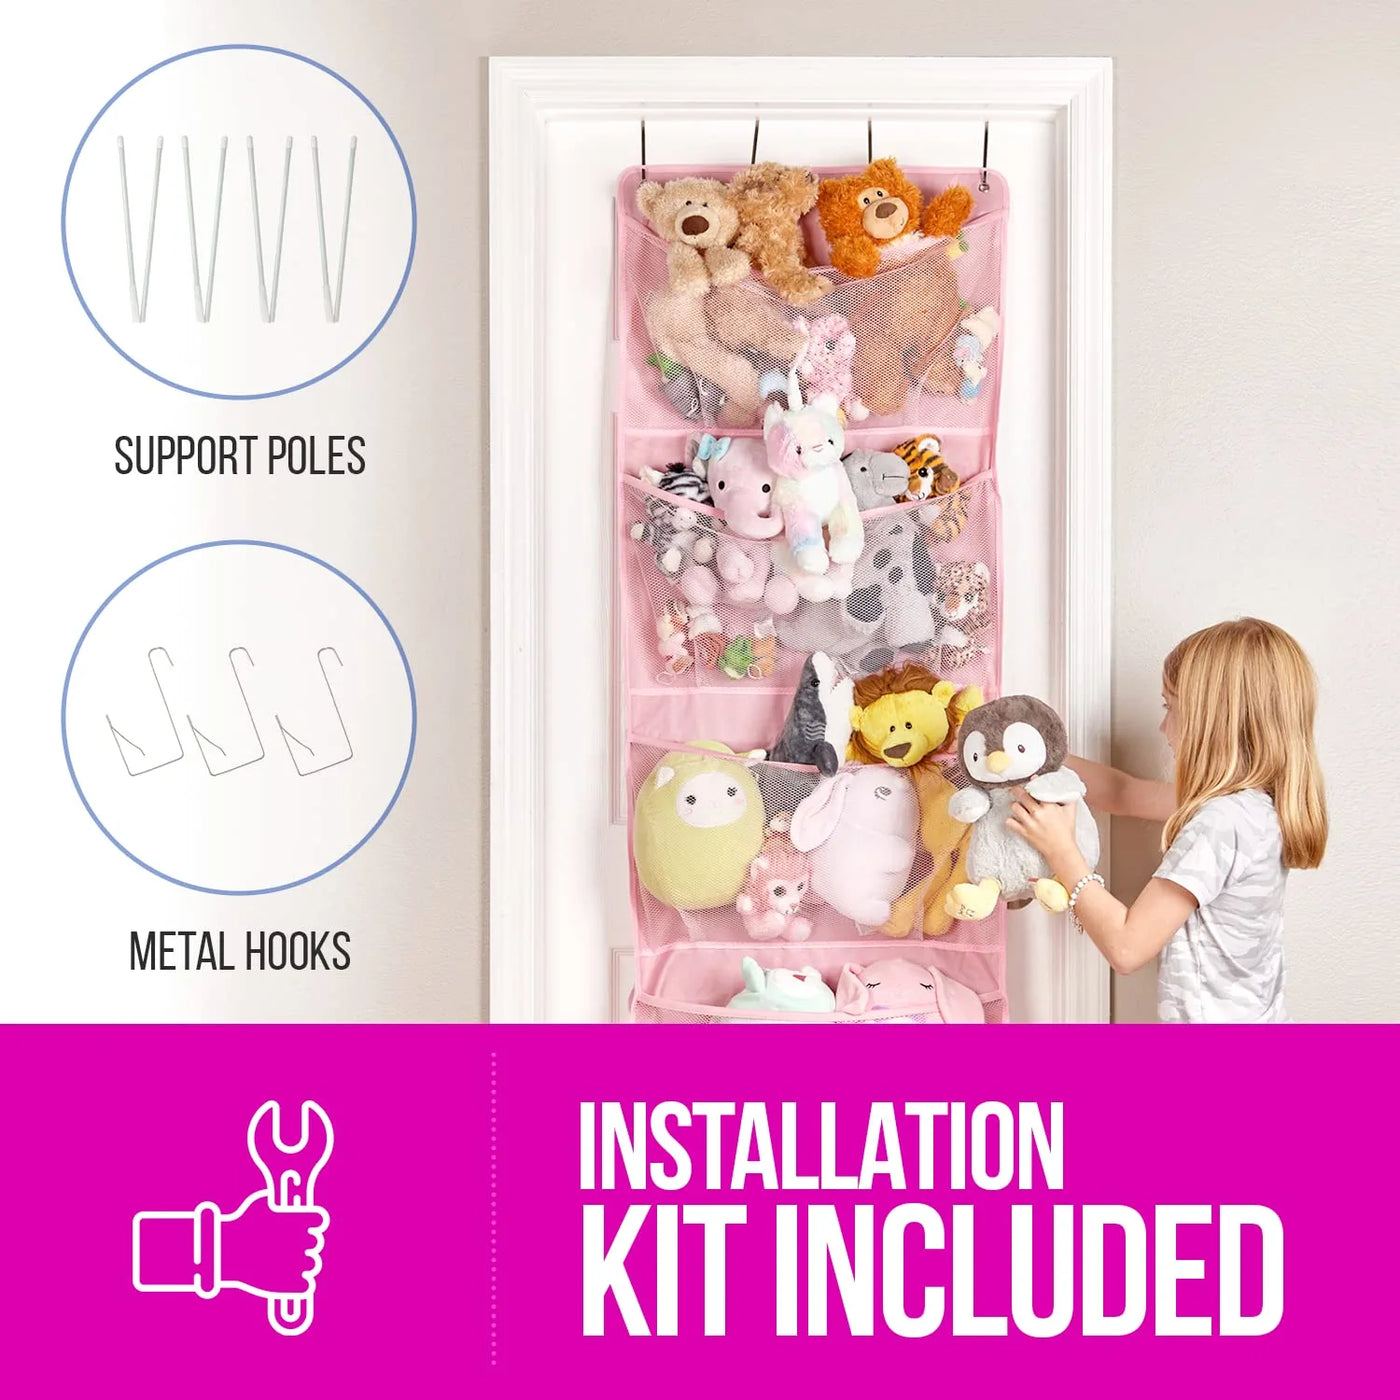 Using A Hanging Door Organizer For Stuffed Animal Storage - Small Stuff  Counts